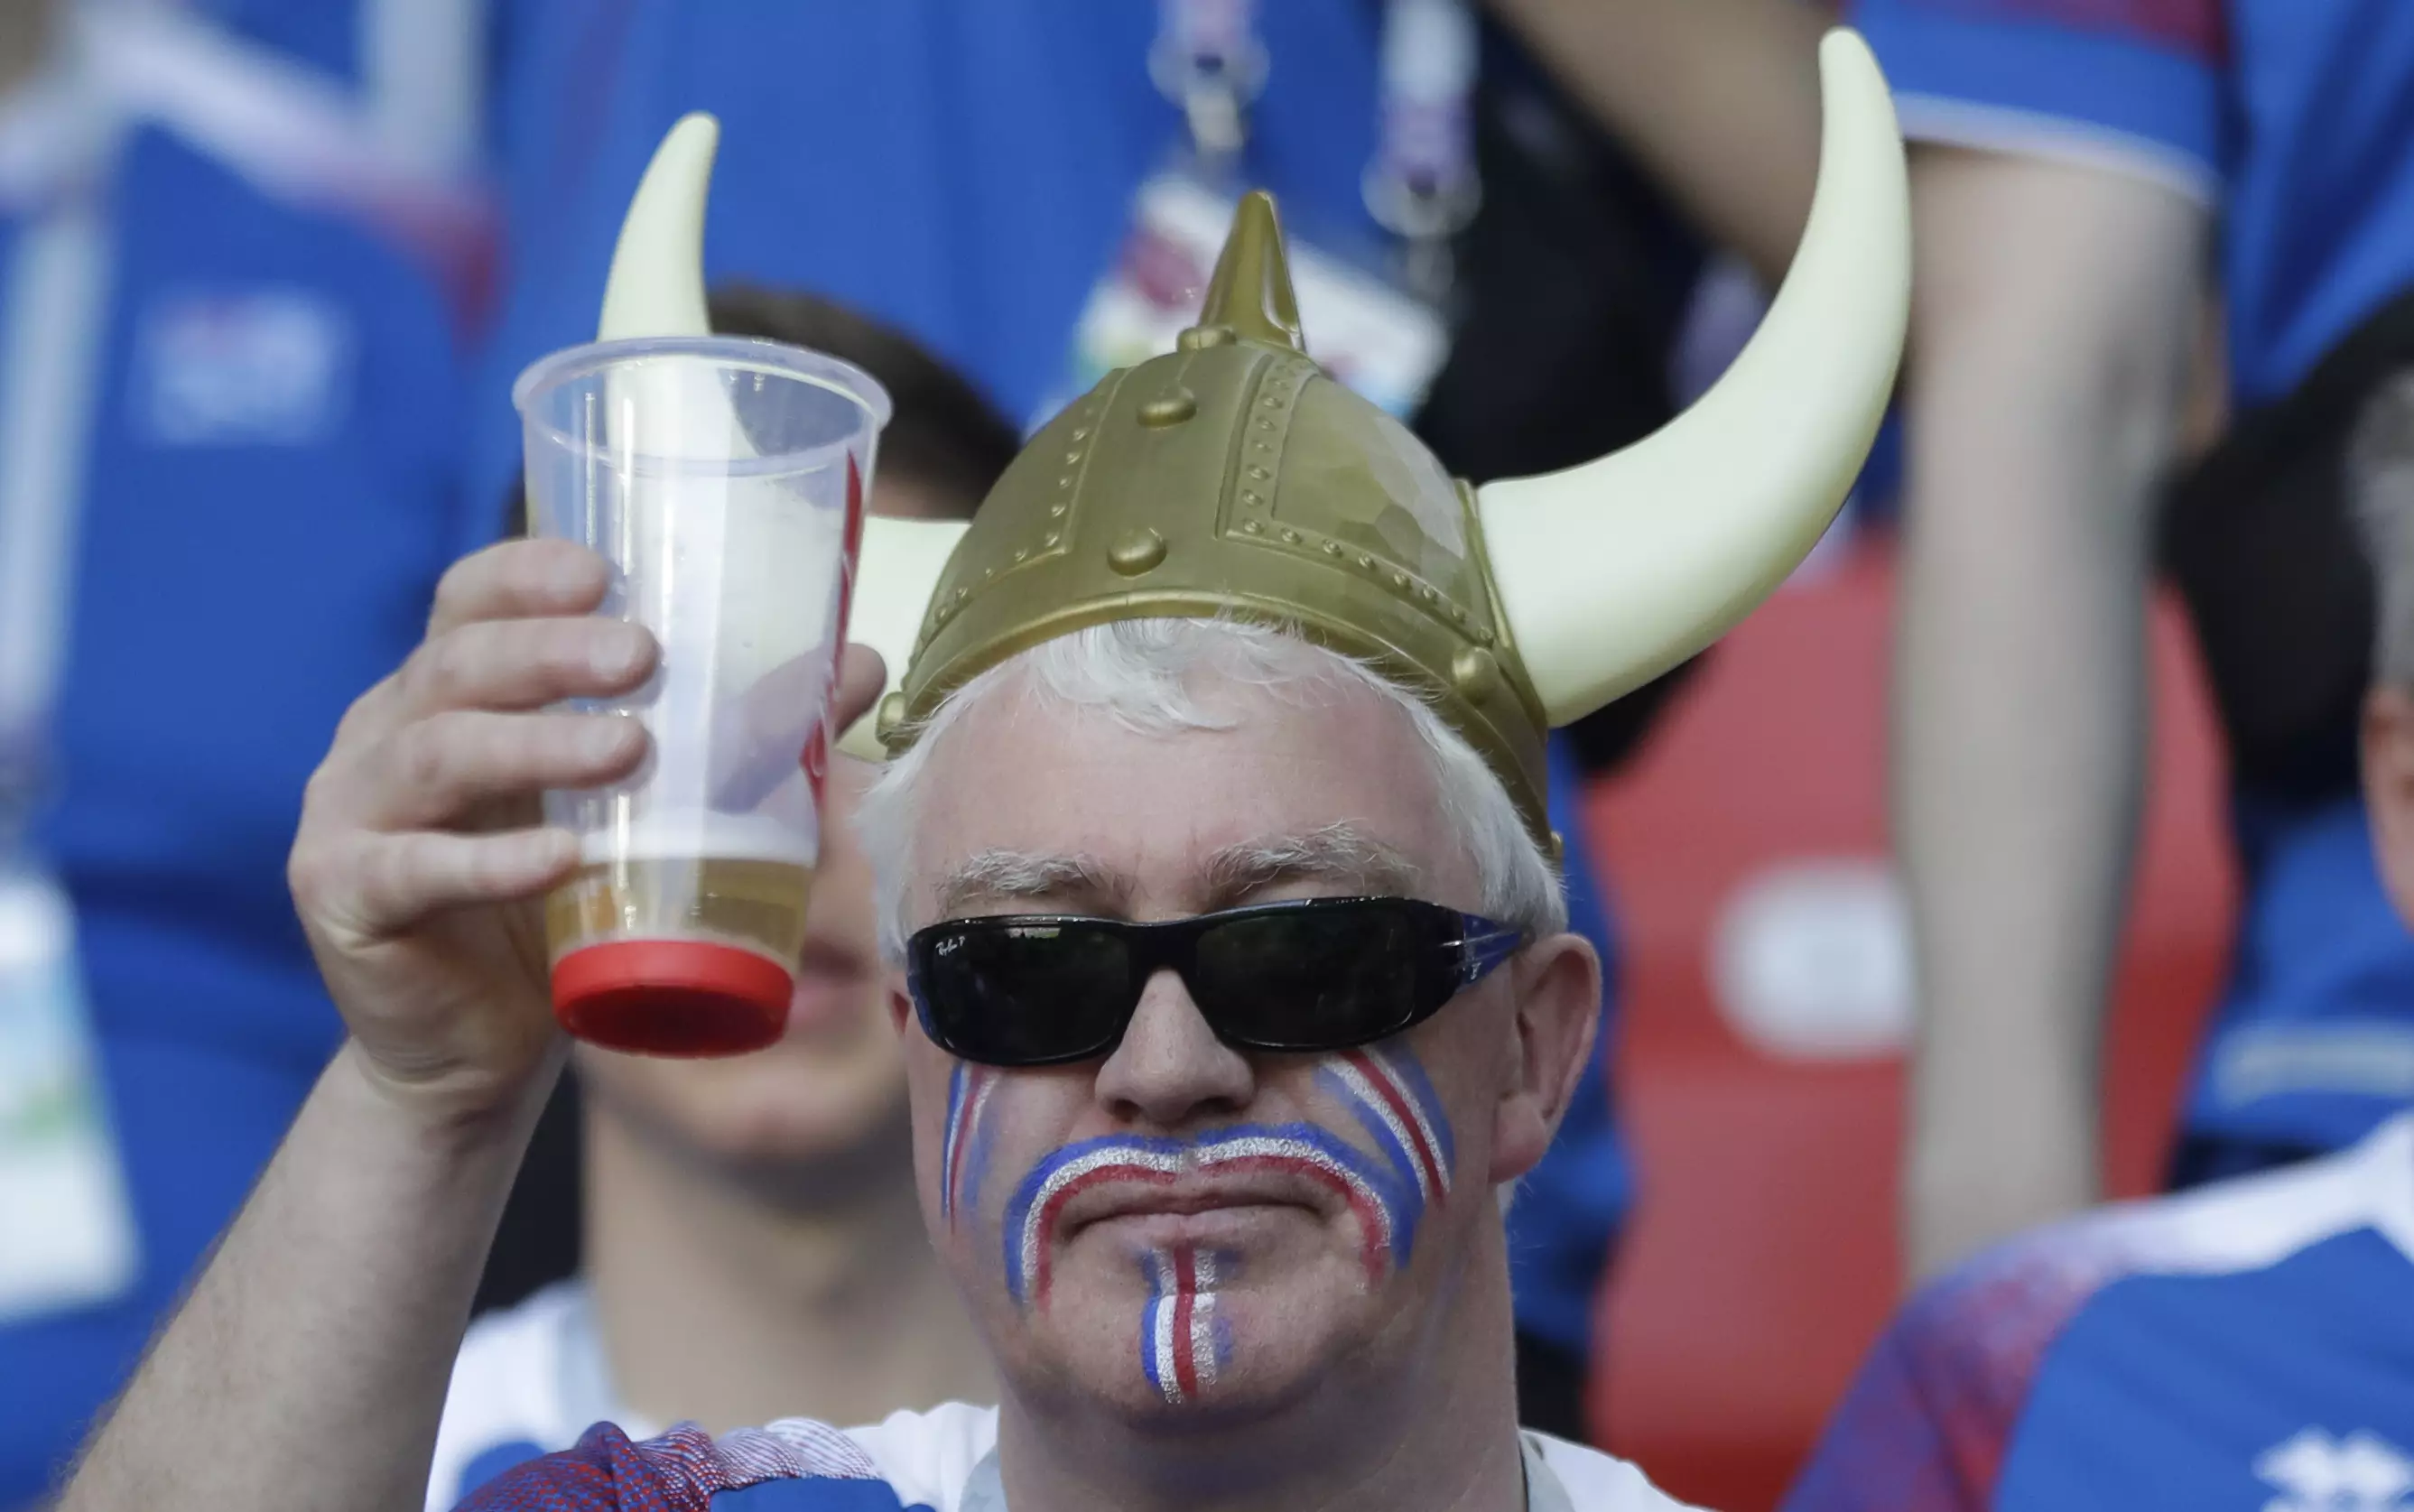 A fan toasts with a beer. Image: PA